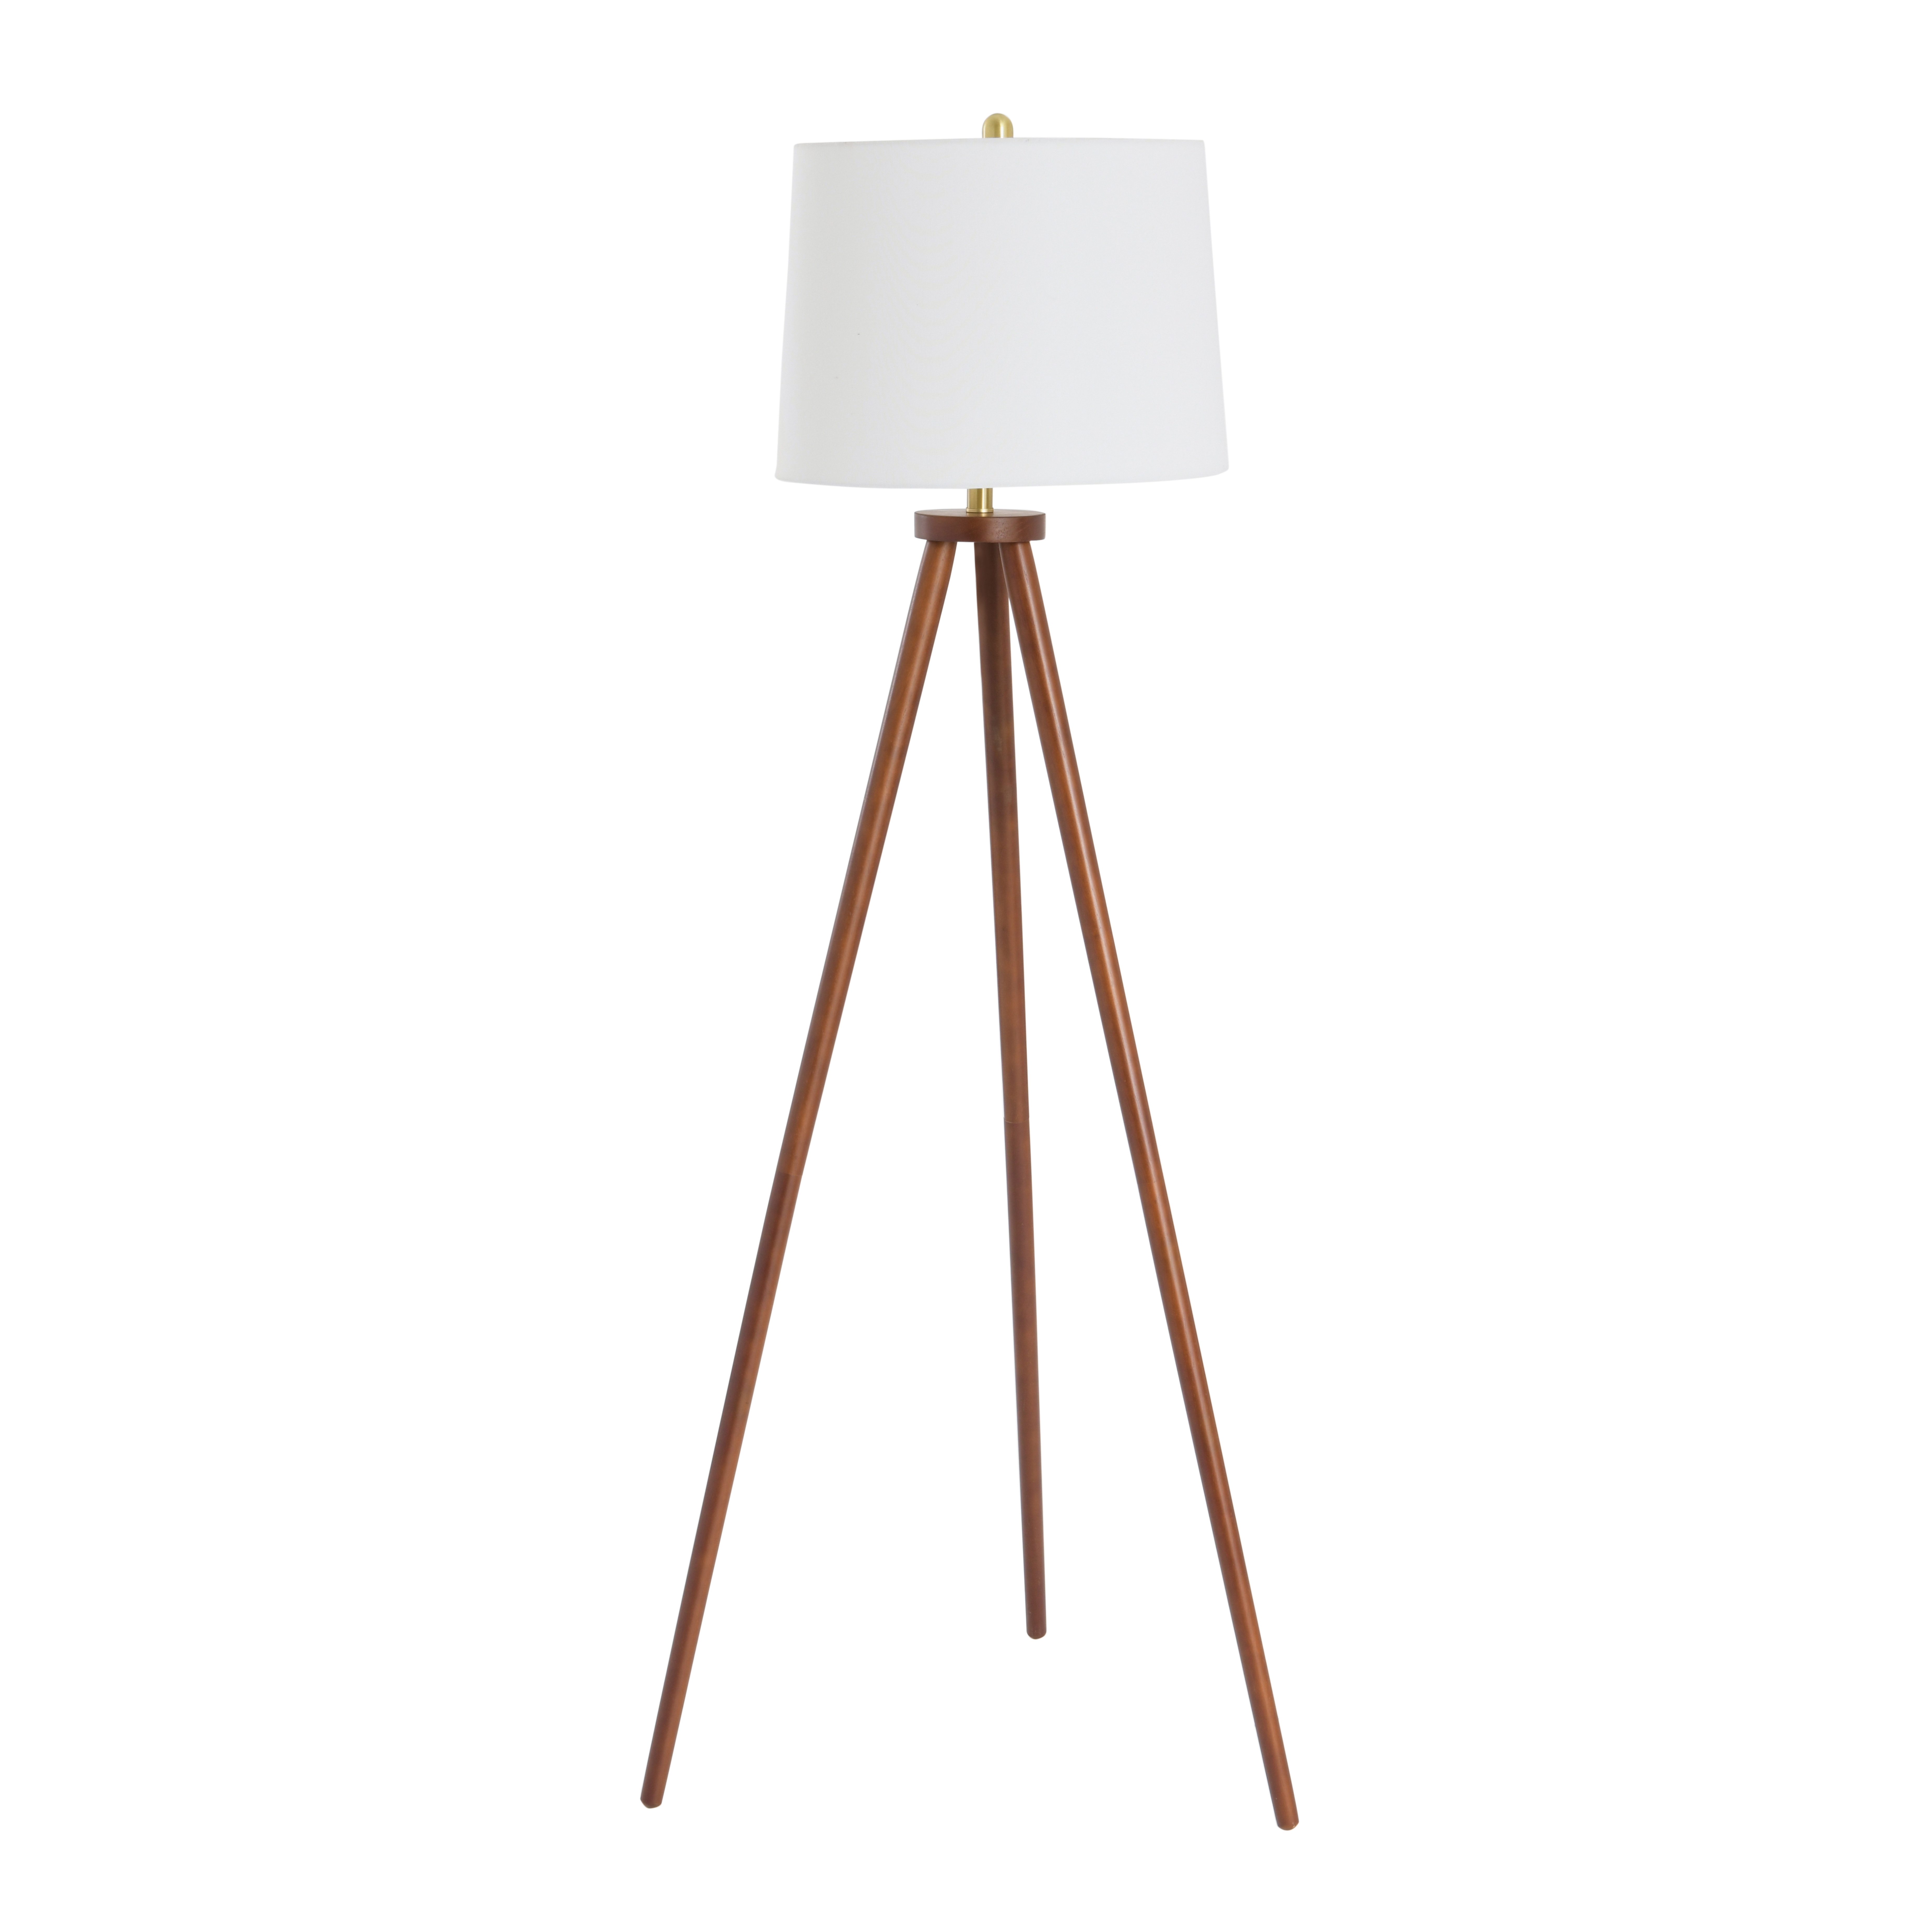 A-Frame Tripod Rubber Wood Floor Lamp with Cream Linen Shade, Espresso - Nomad Home